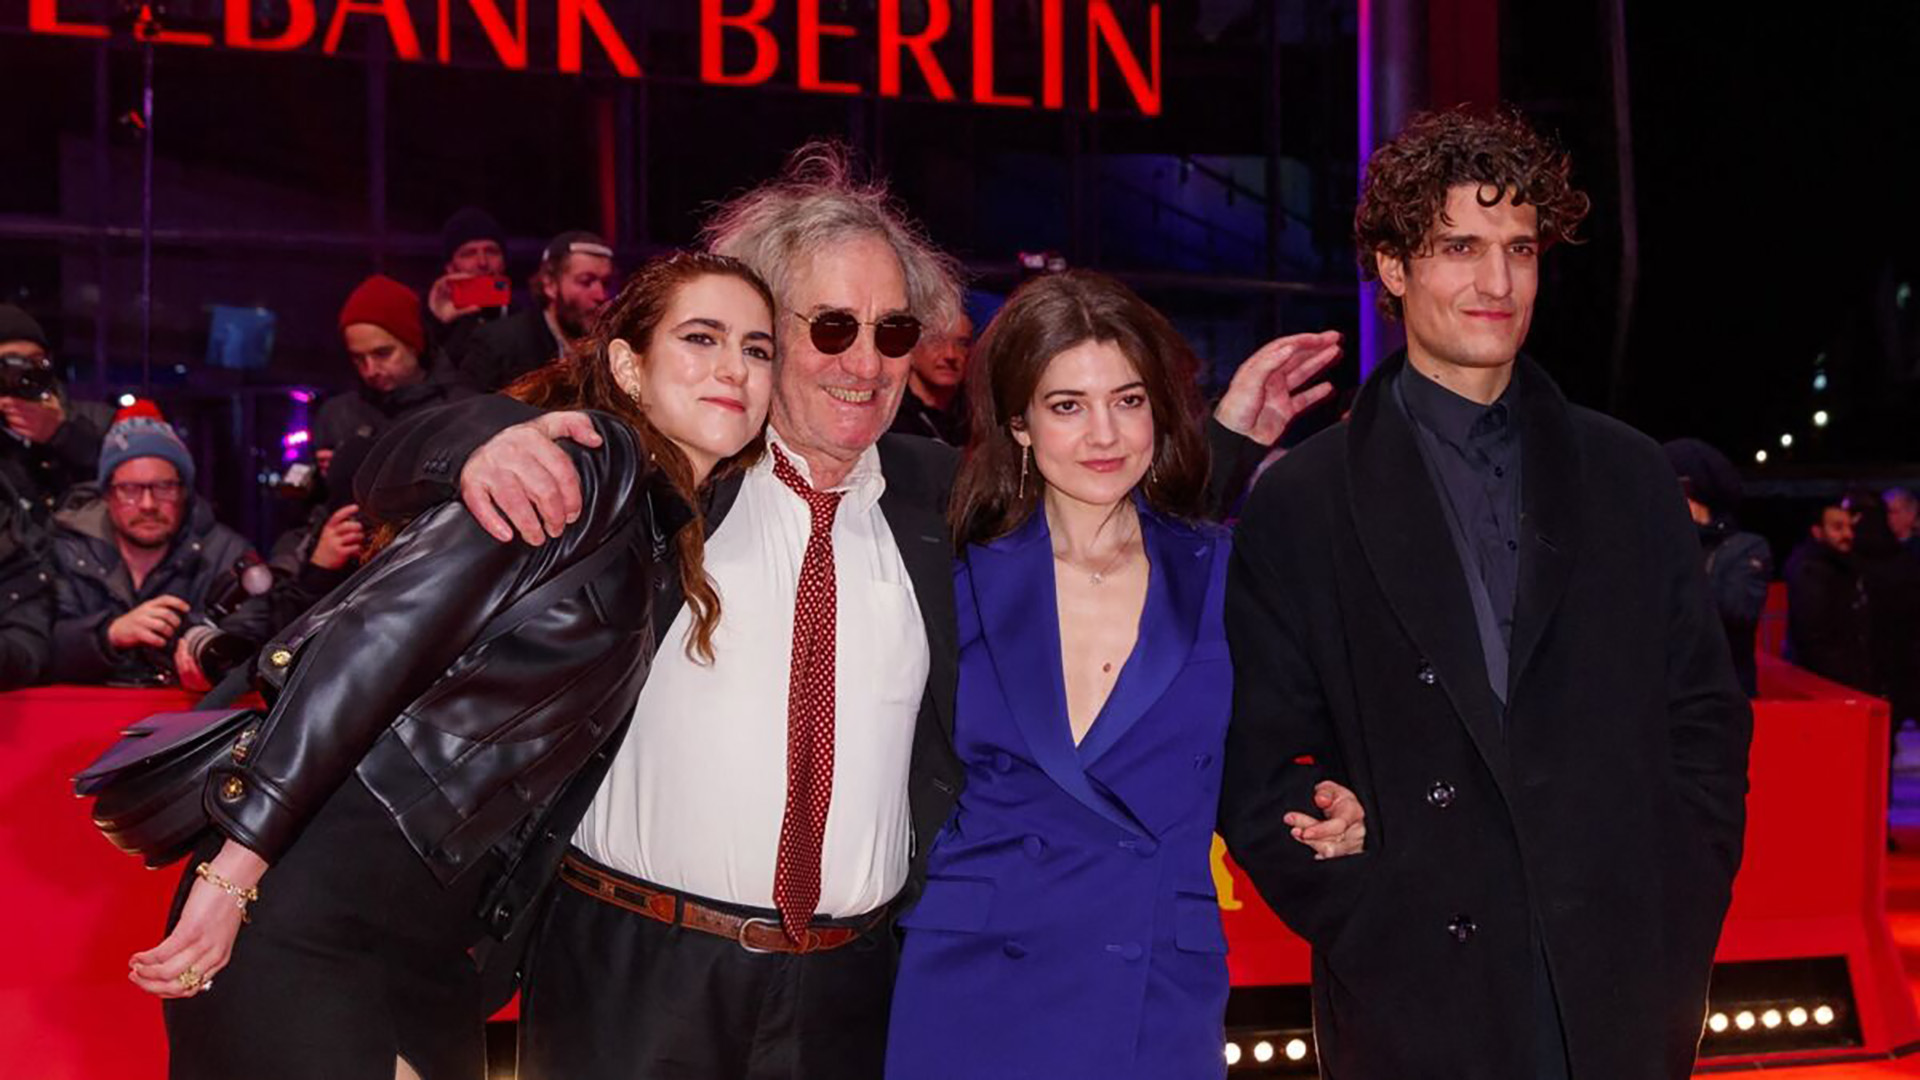 From left: Léna, Philippe, Esther and Louis Garrel at the Berlinale earlier this year